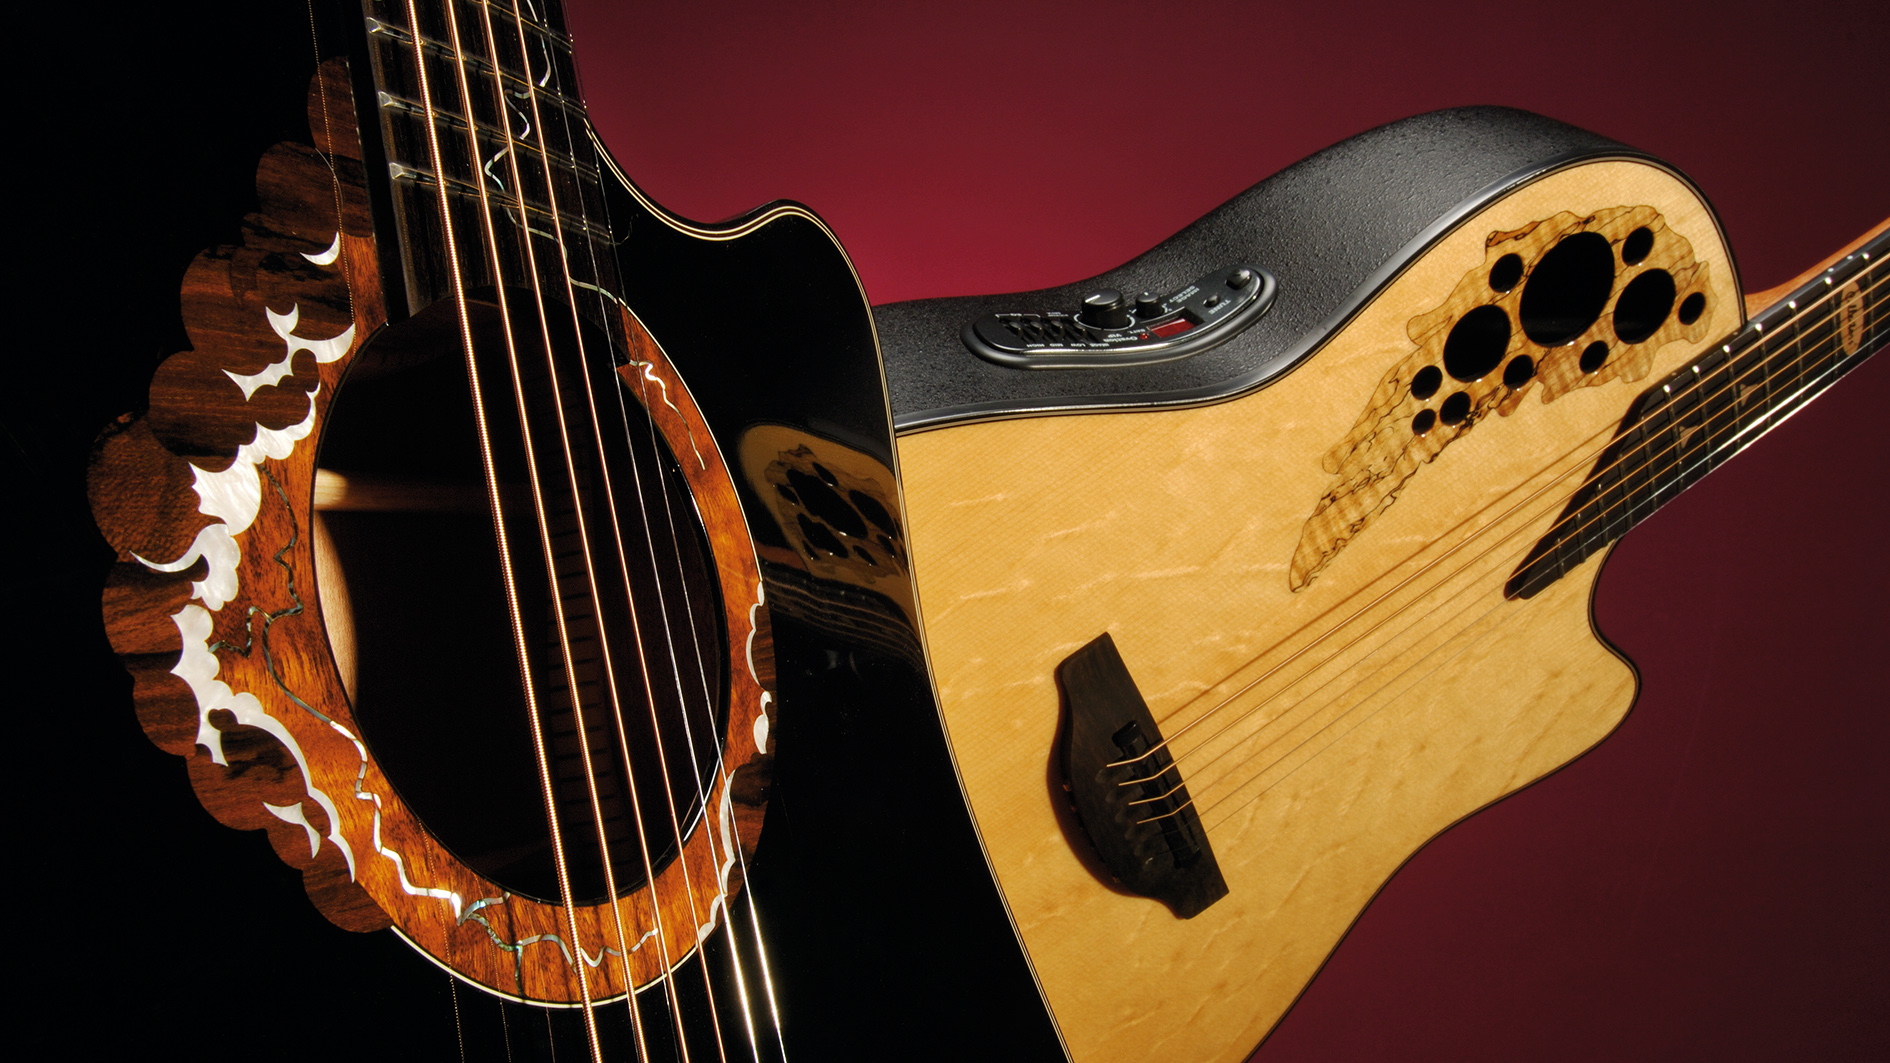 Gewa Music Acquires Ovation Guitars Guitar World Thousands of companies like you use panjiva to research suppliers and competitors. gewa music acquires ovation guitars